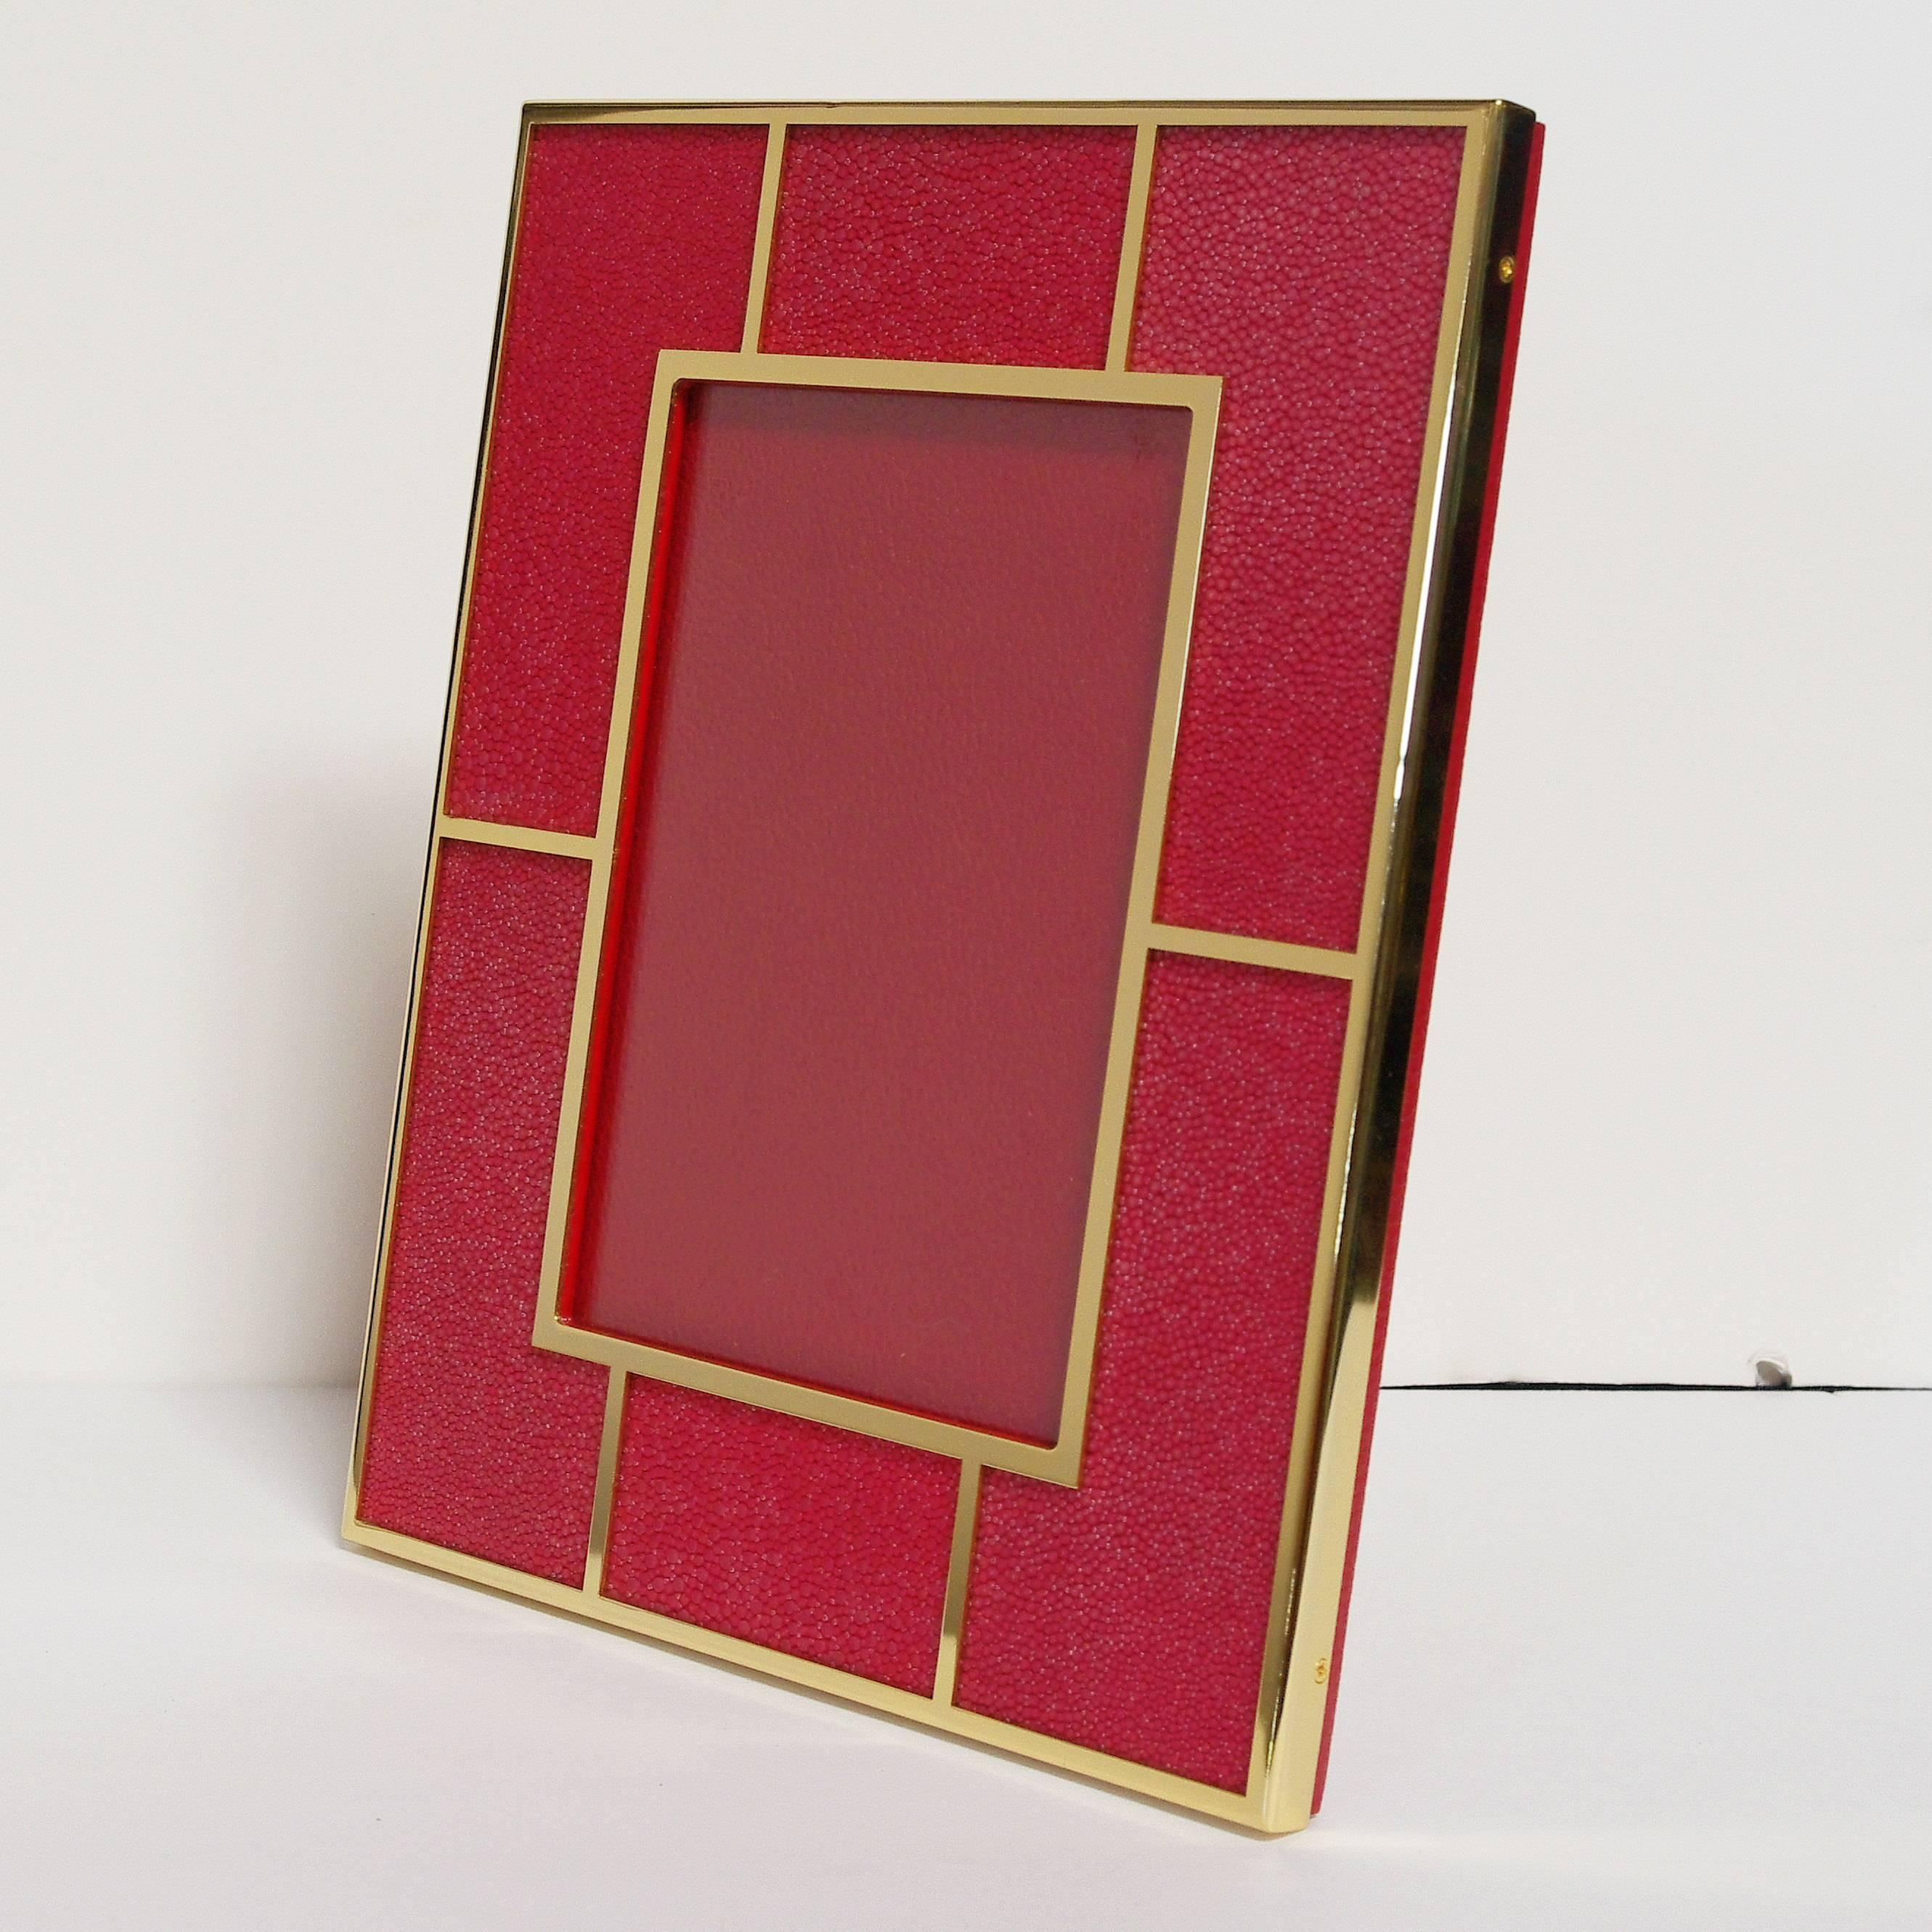 Rectangular Red Shagreen Gold-Plated Photo Frame by Fabio Ltd
For photo size 5" x 7".
Comes in red leather gift box